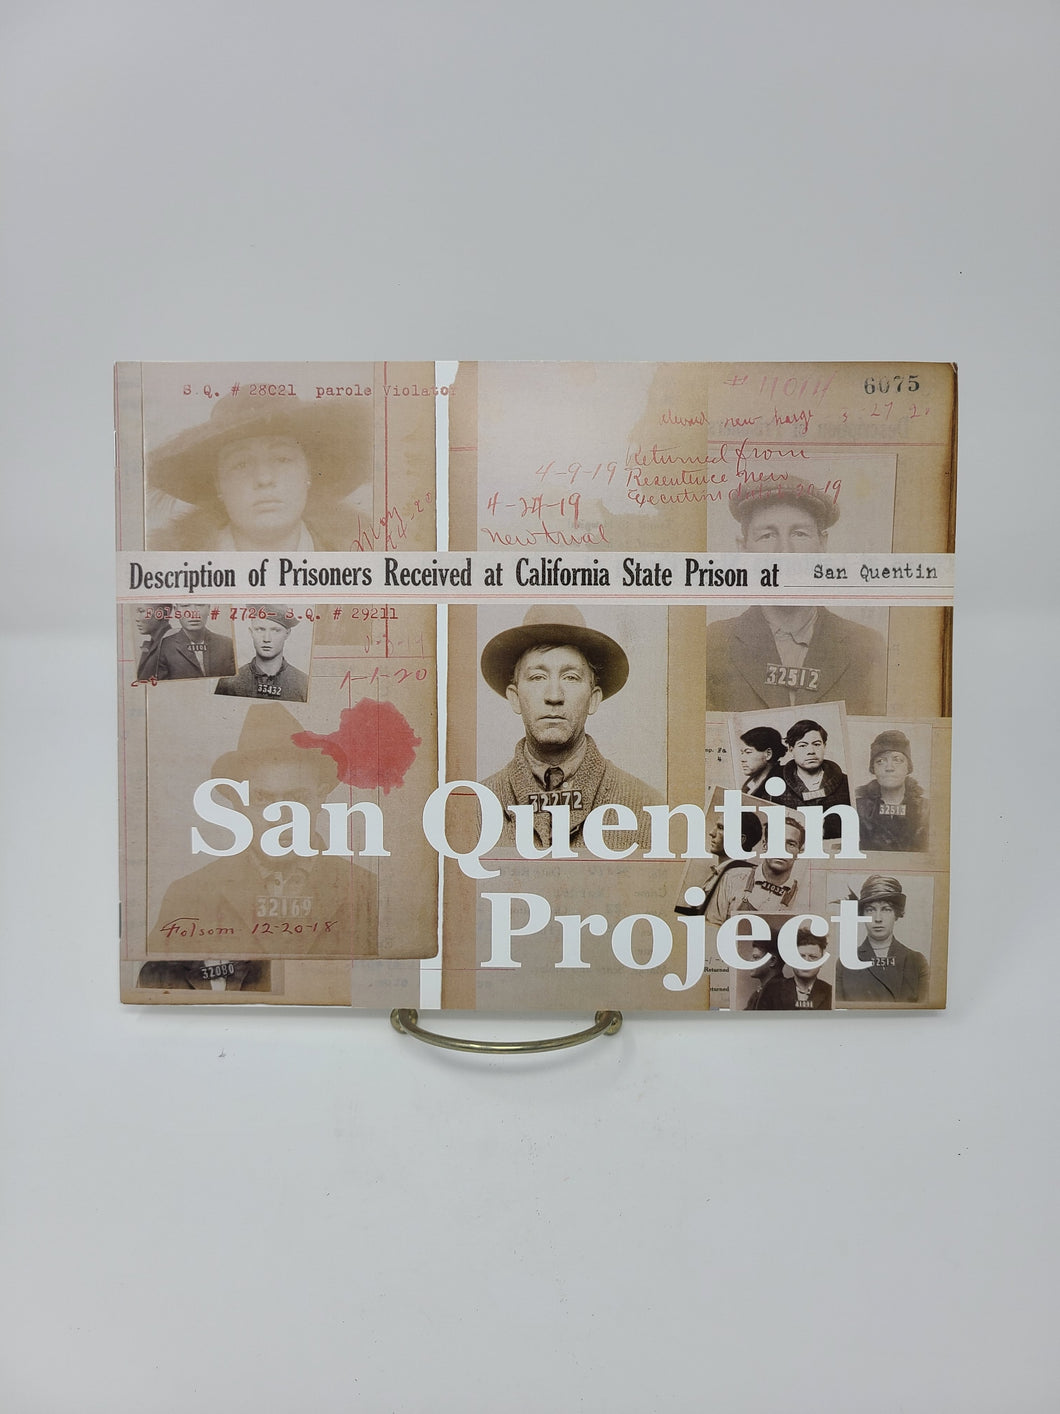 San Quentin Project: Description of Prisoners Received at California State Prison at San Quentin